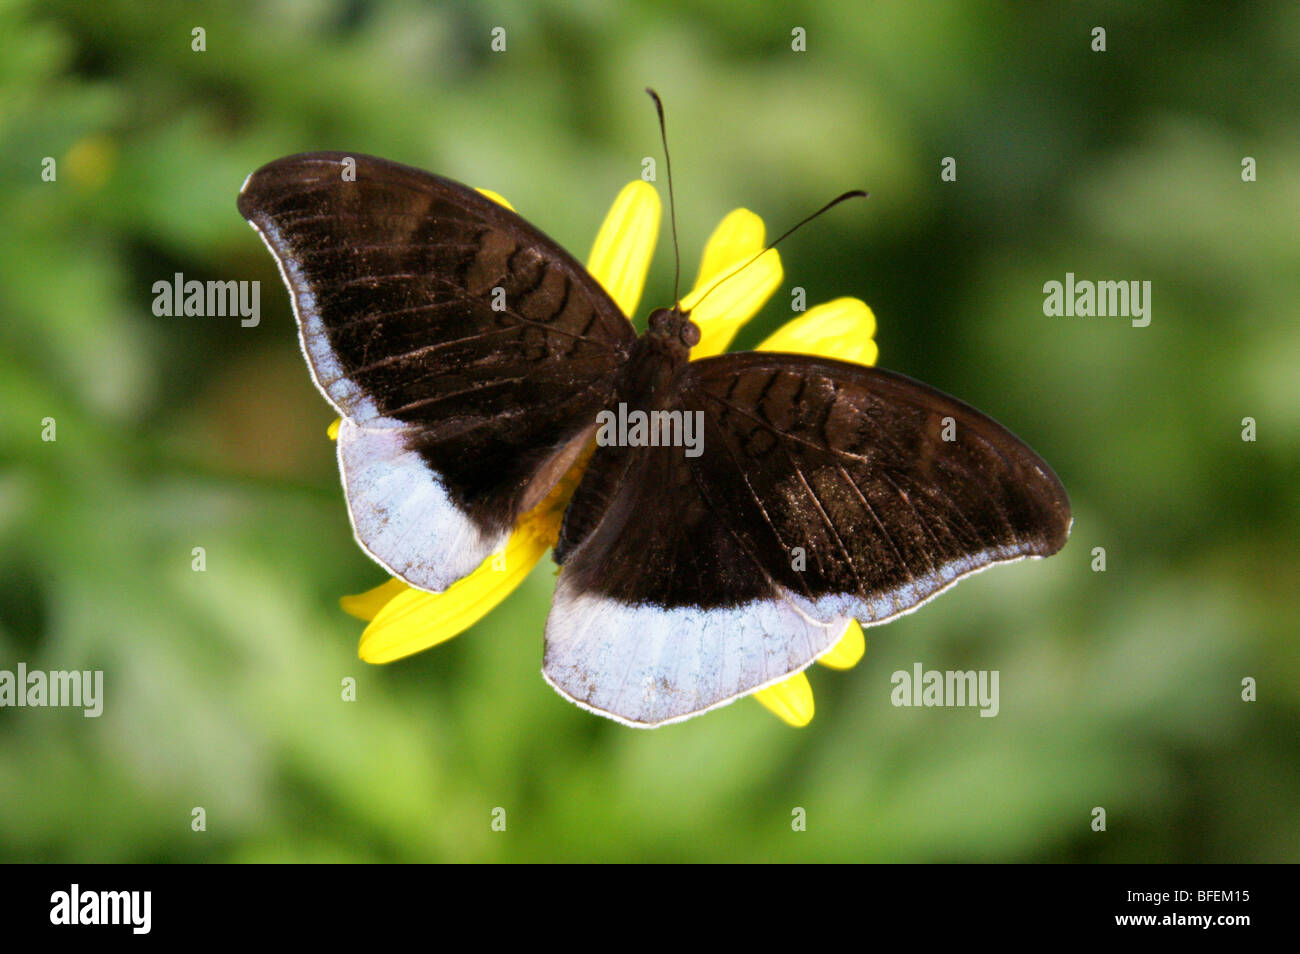 The White-Edged Blue Baron Butterfly, Euthalia phemius, Nymphalidae from Sikkim, Assam, Burma, Southern China and Hong Kong. Stock Photo